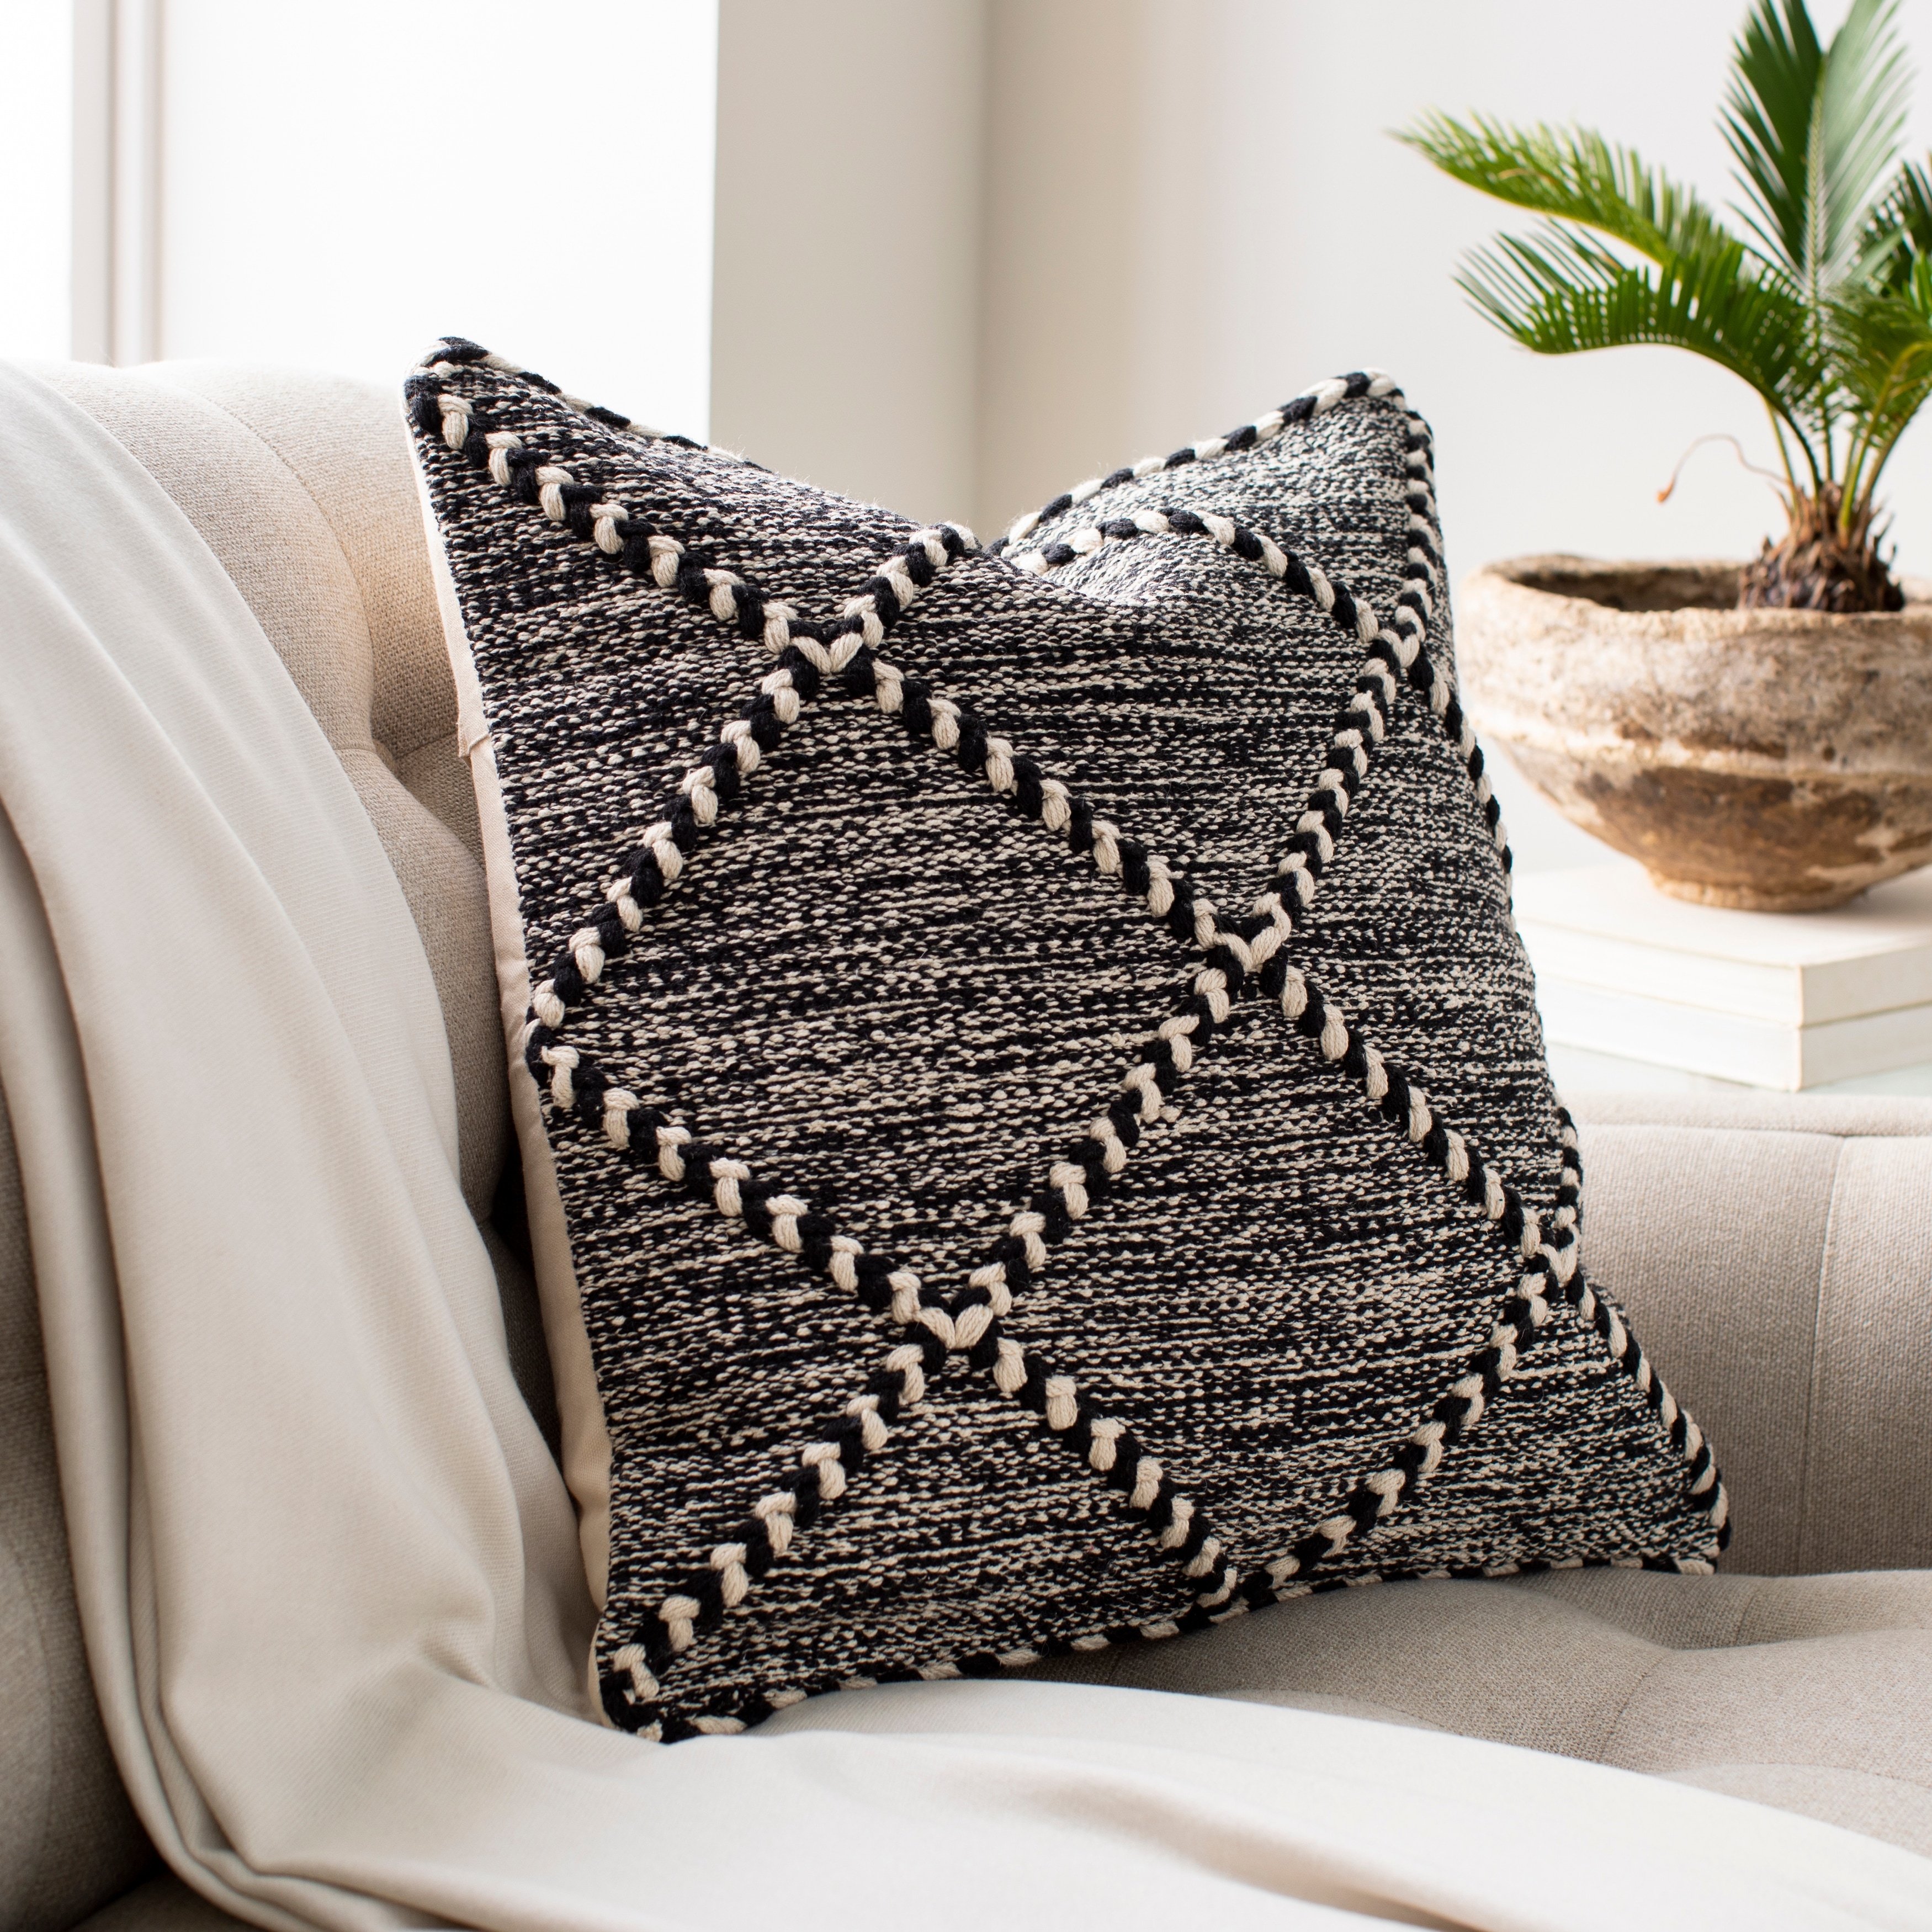 The Curated Nomad Pyrola Handwoven Black and White Boho Throw